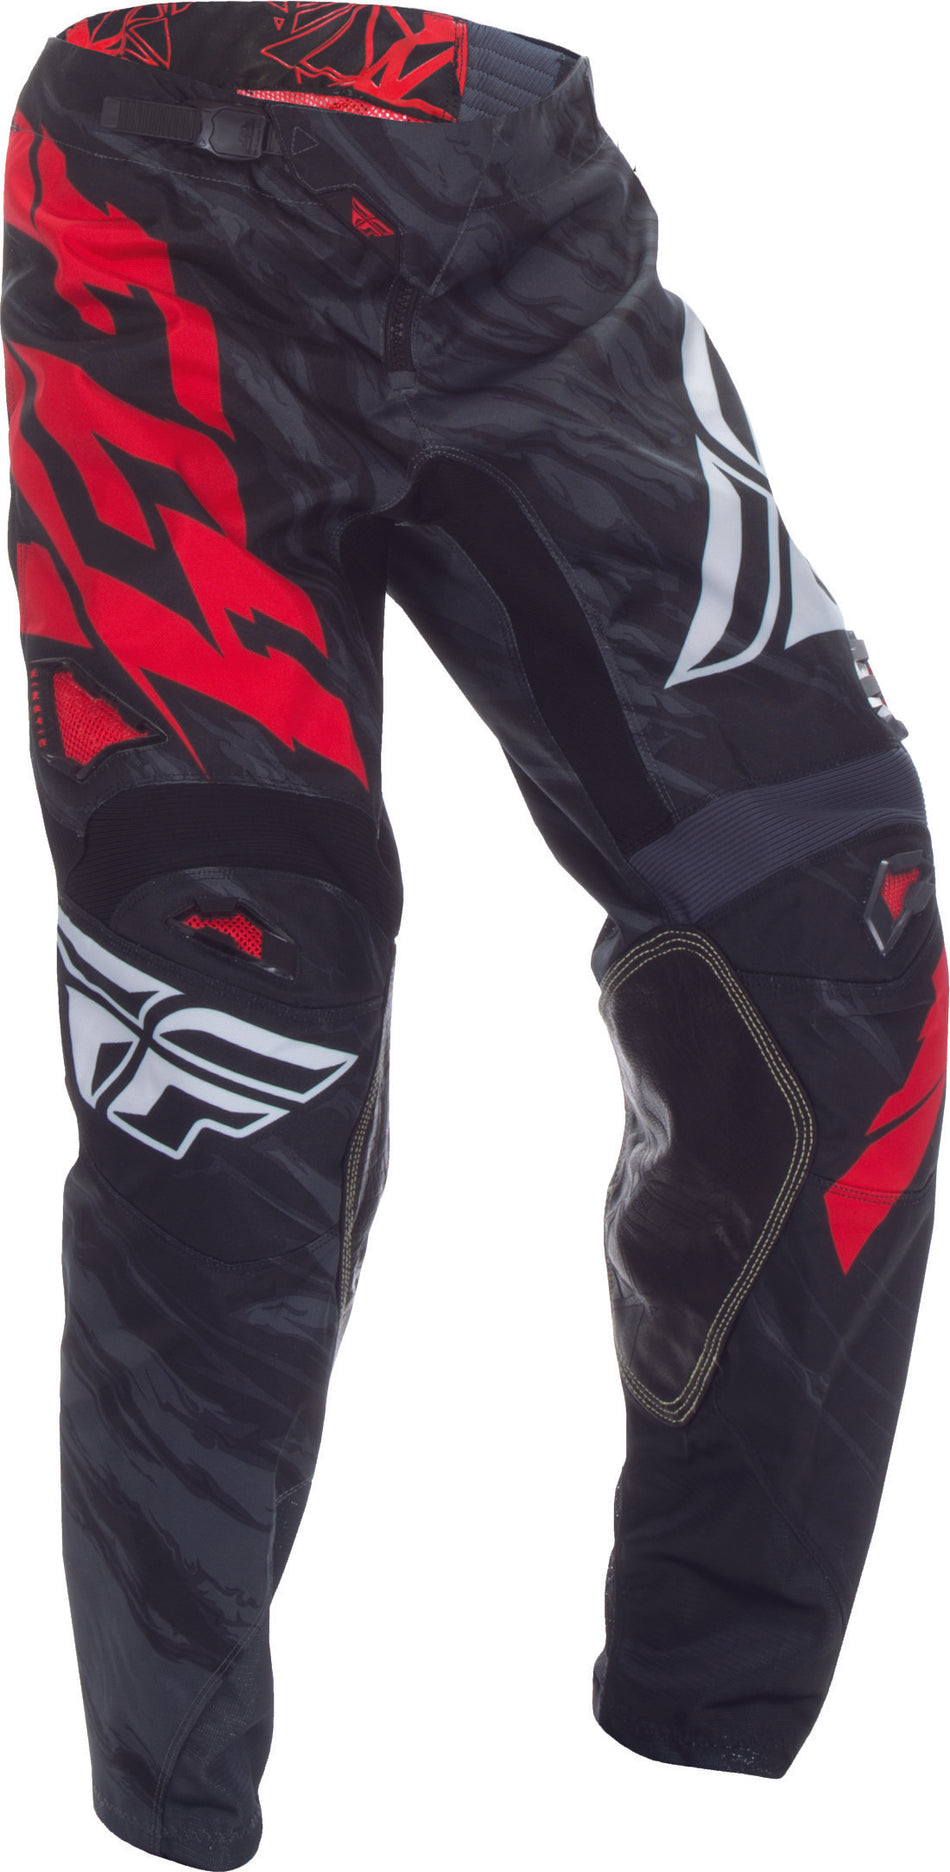 FLY RACING Kinetic Relapse Pant Black/Red Sz 24 370-43024